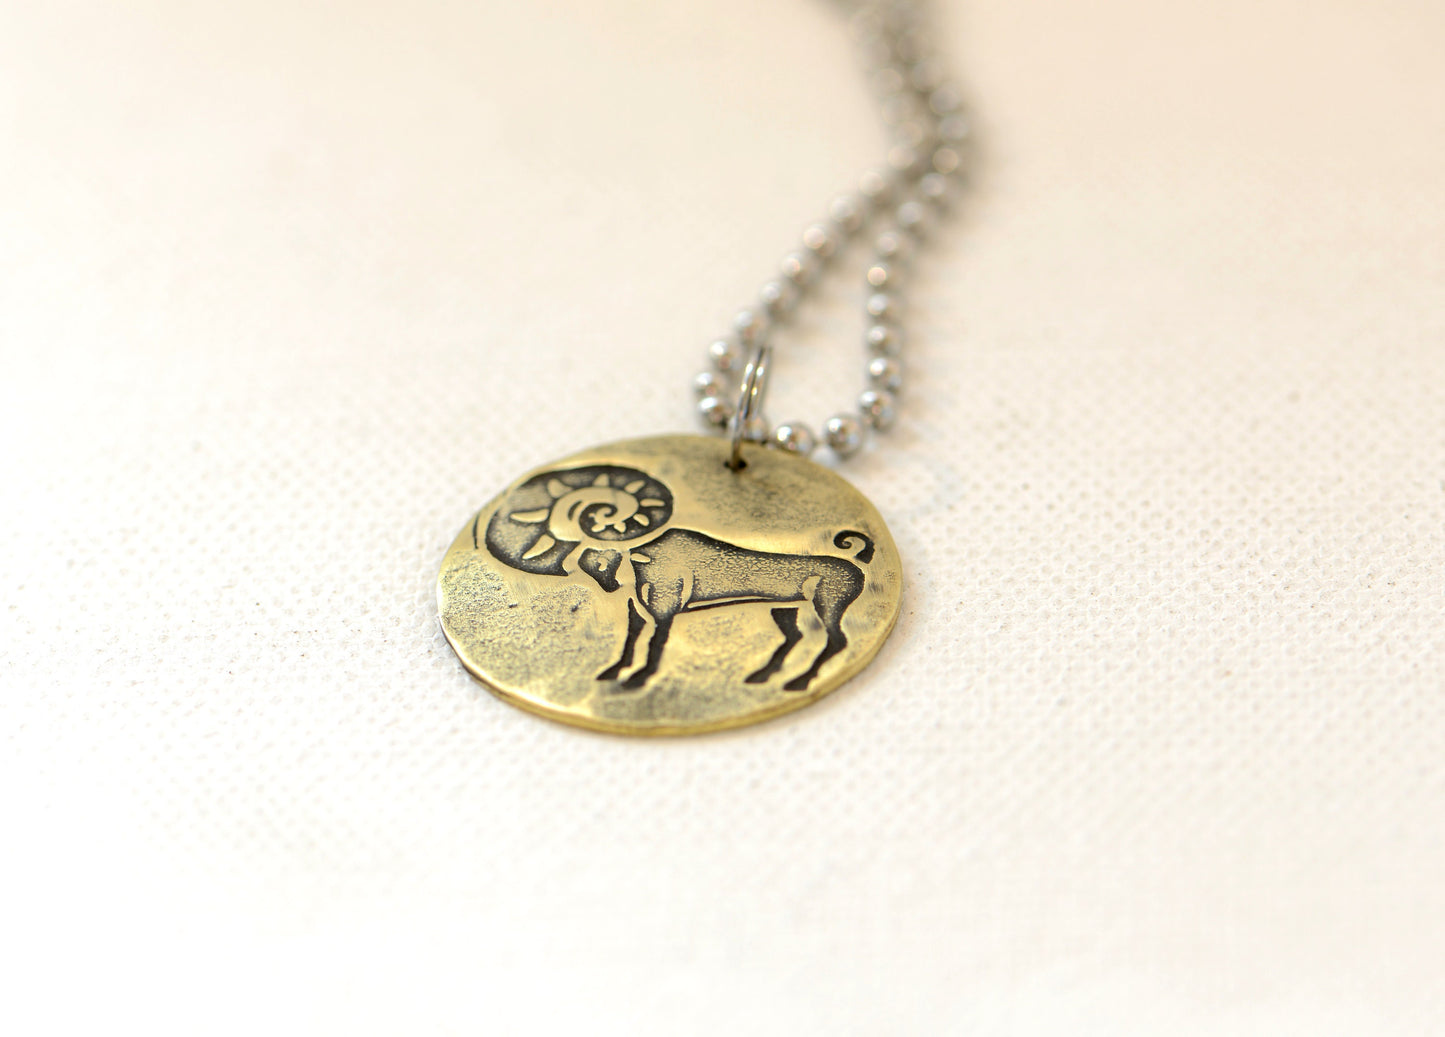 Aires Zodiac Necklace  – Personalized Astrology and Zodiac Signs on Brass Discs